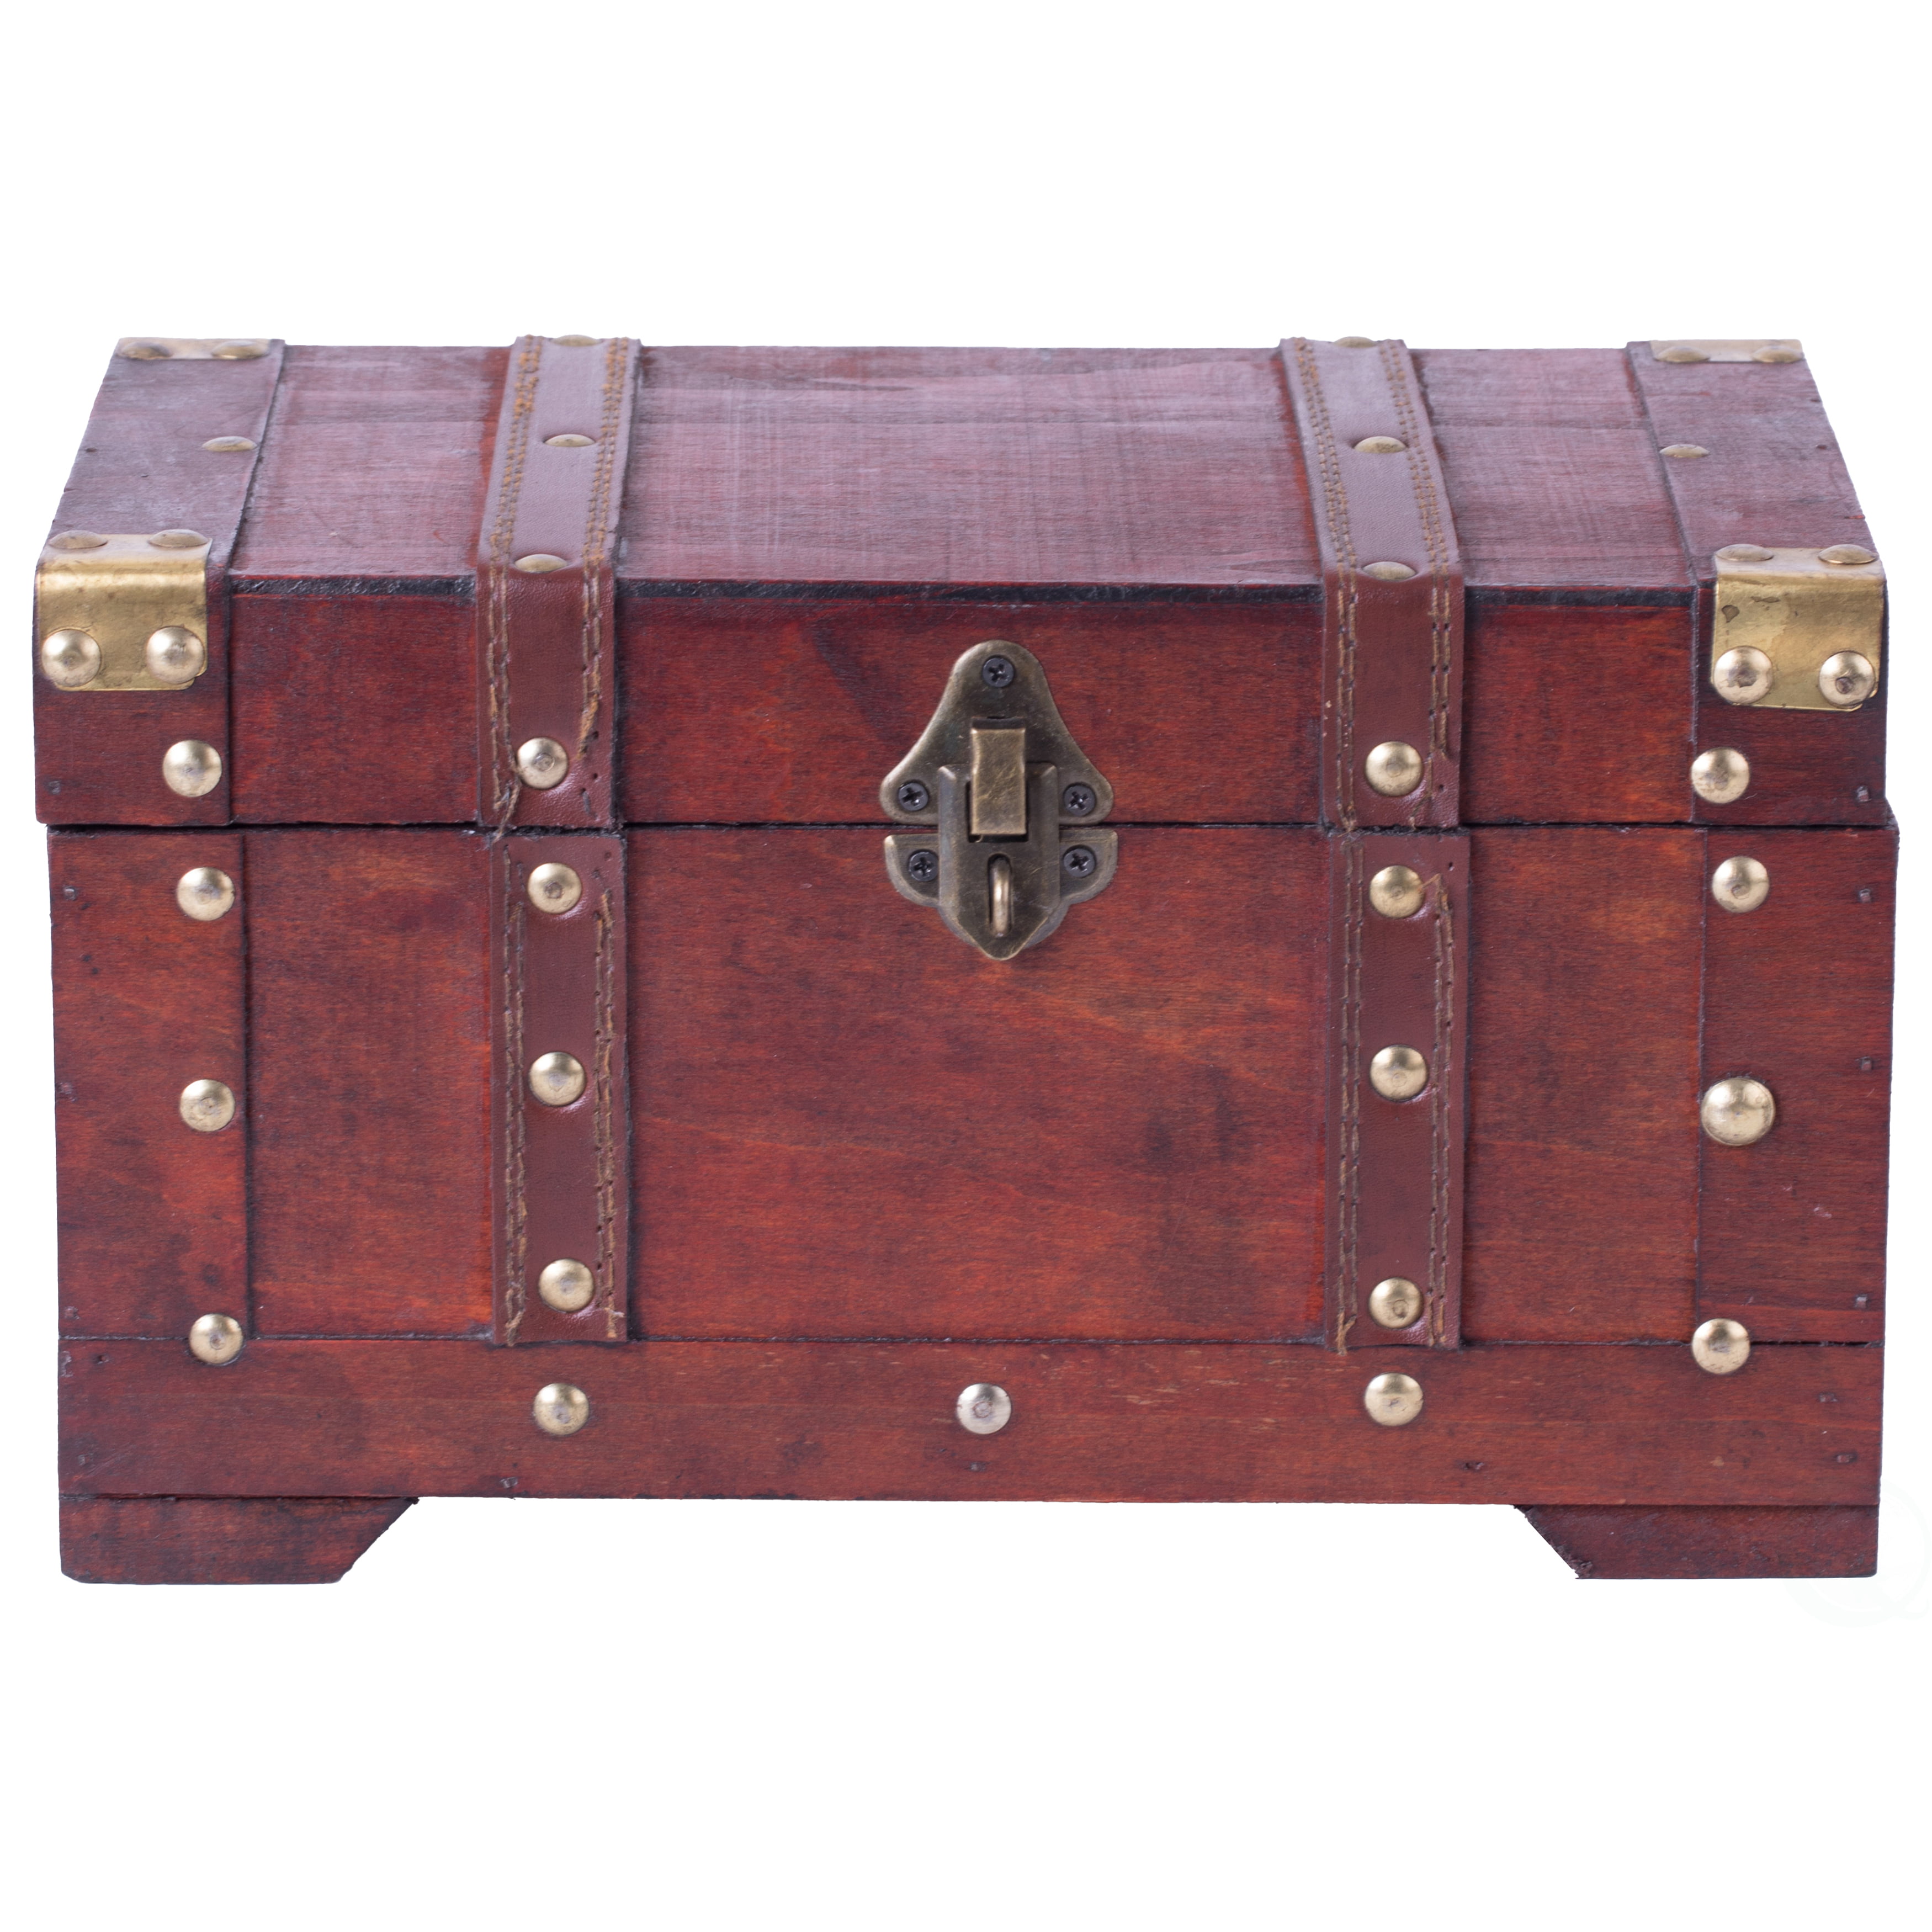 Set of 2 Rustic Wooden Colonial Style Trunk Treasure Chests Vintage Storage Box 